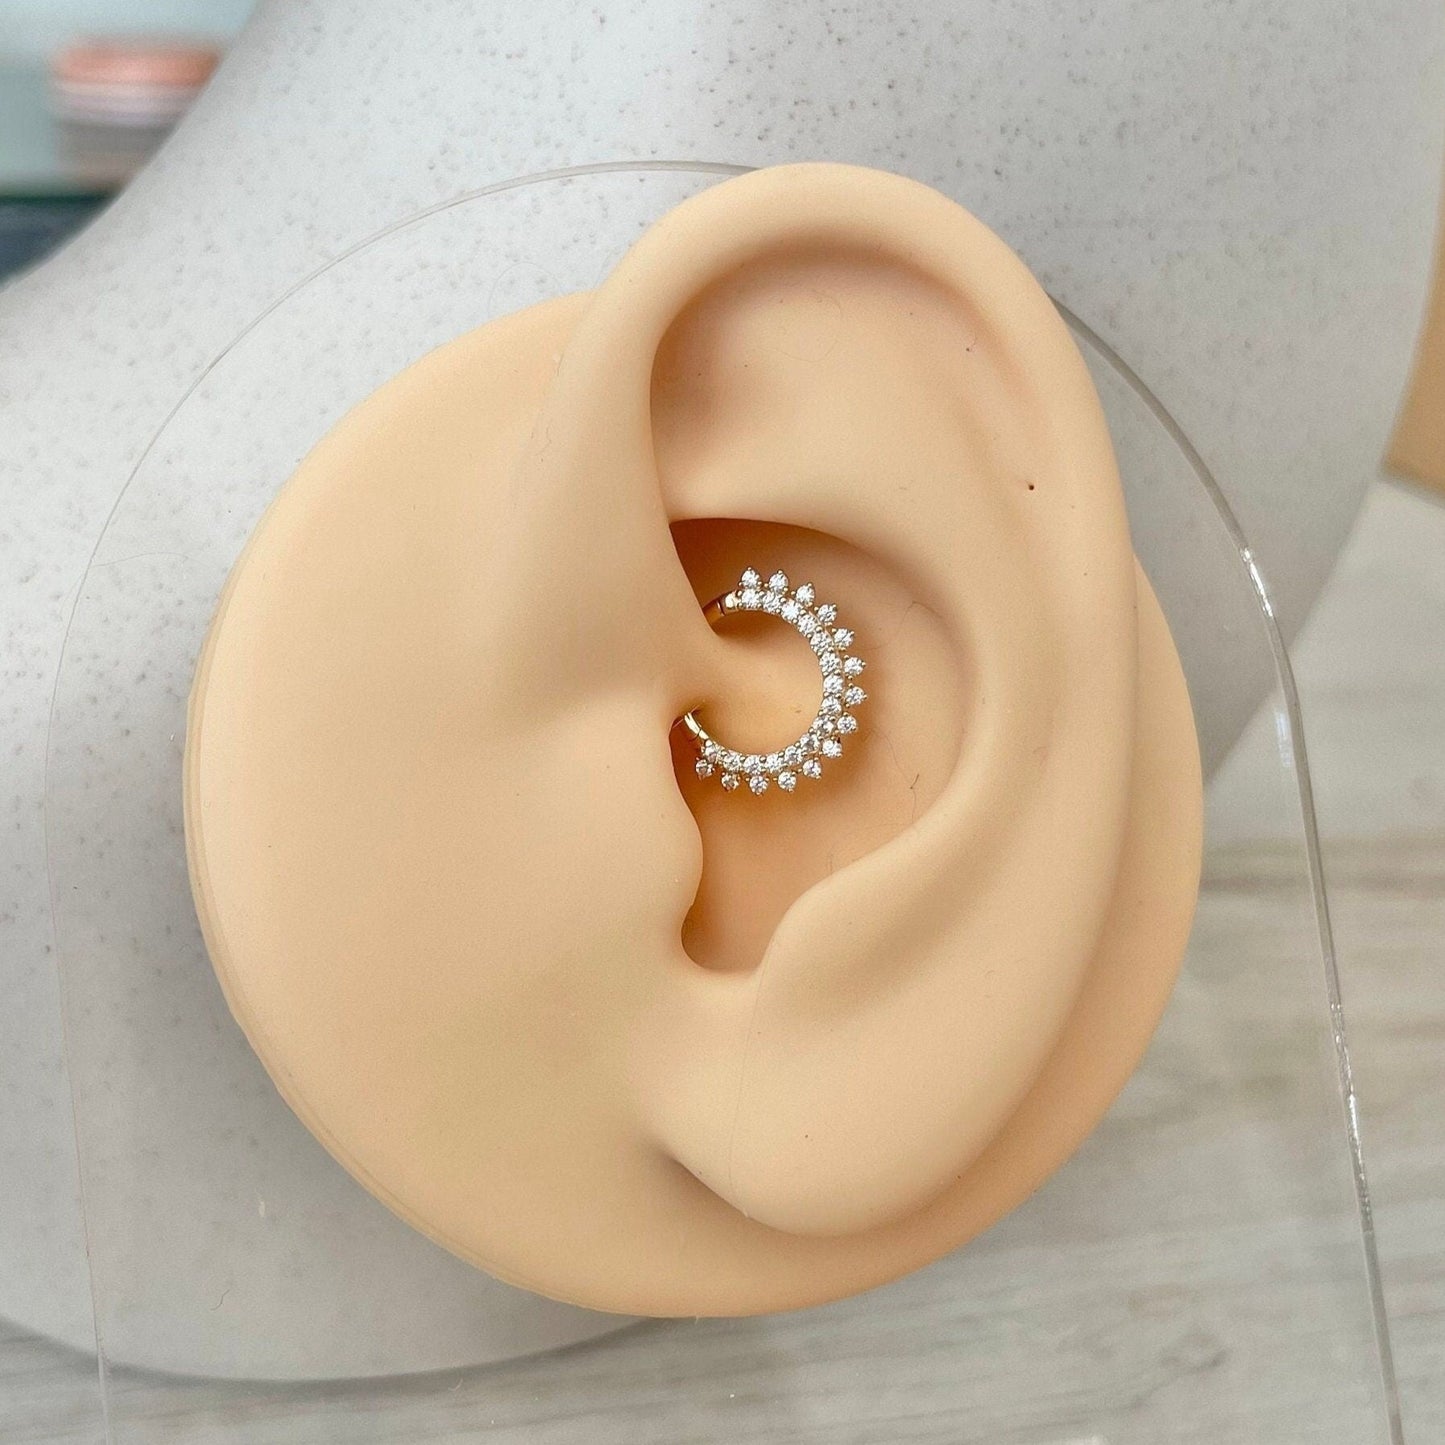 Solid Gold Daith Earring (16G, 8mm or 10mm, 14k Solid White or Yellow Gold)